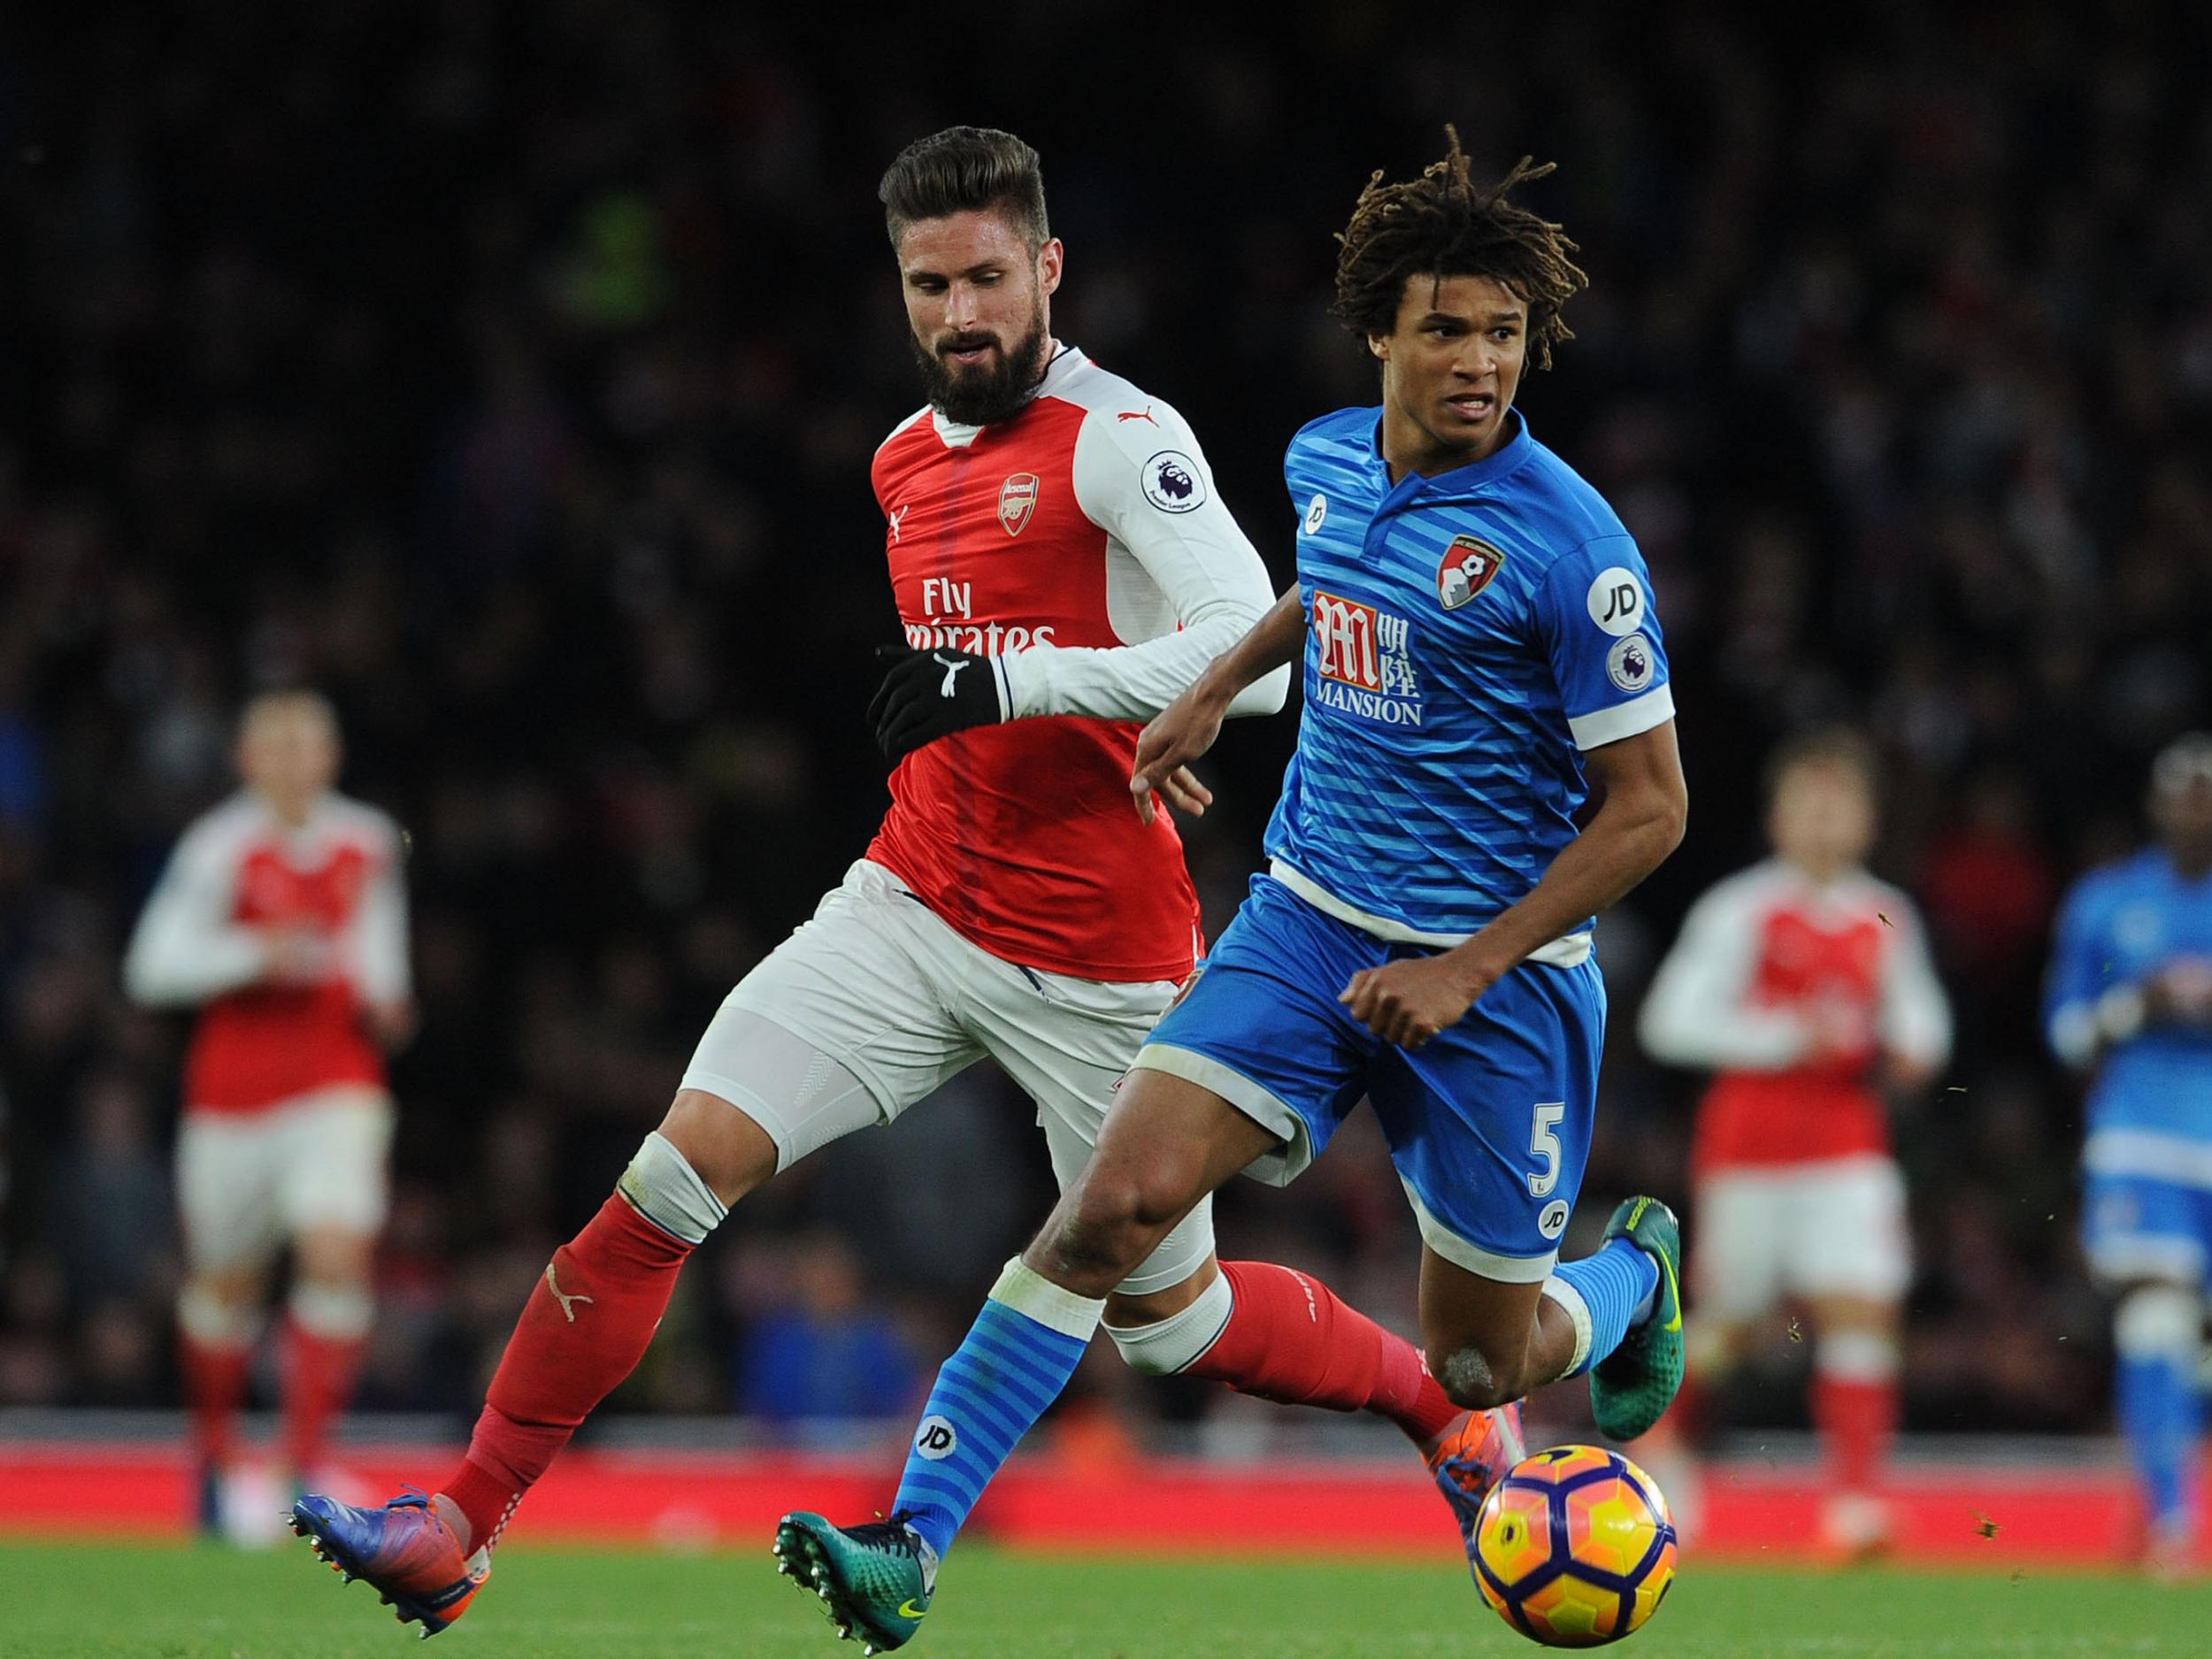 Arsenal beat Bournemouth 3-1 in the reverse fixture this season